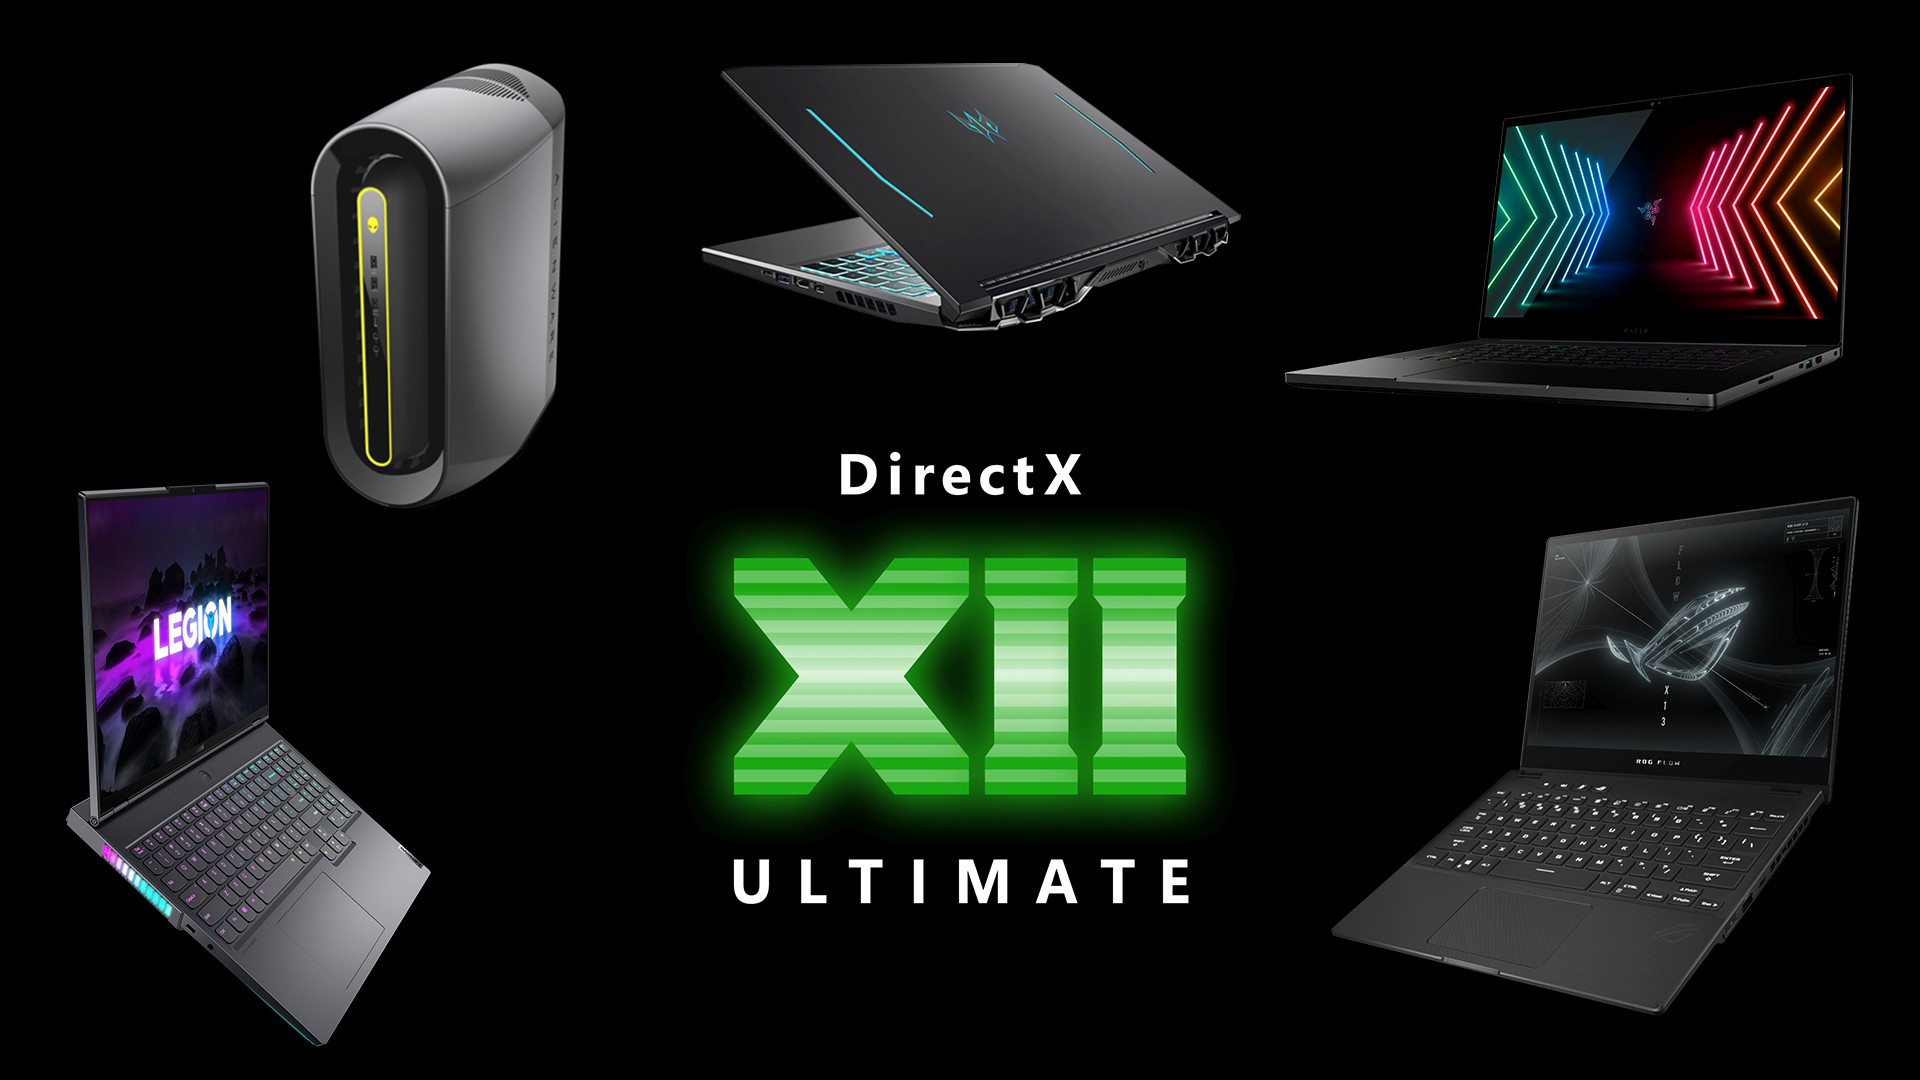 ces-2021-learn-about-the-new-windows-pc-gaming-devices-coming-soon-from-our-favorite-partners-xbox-wire